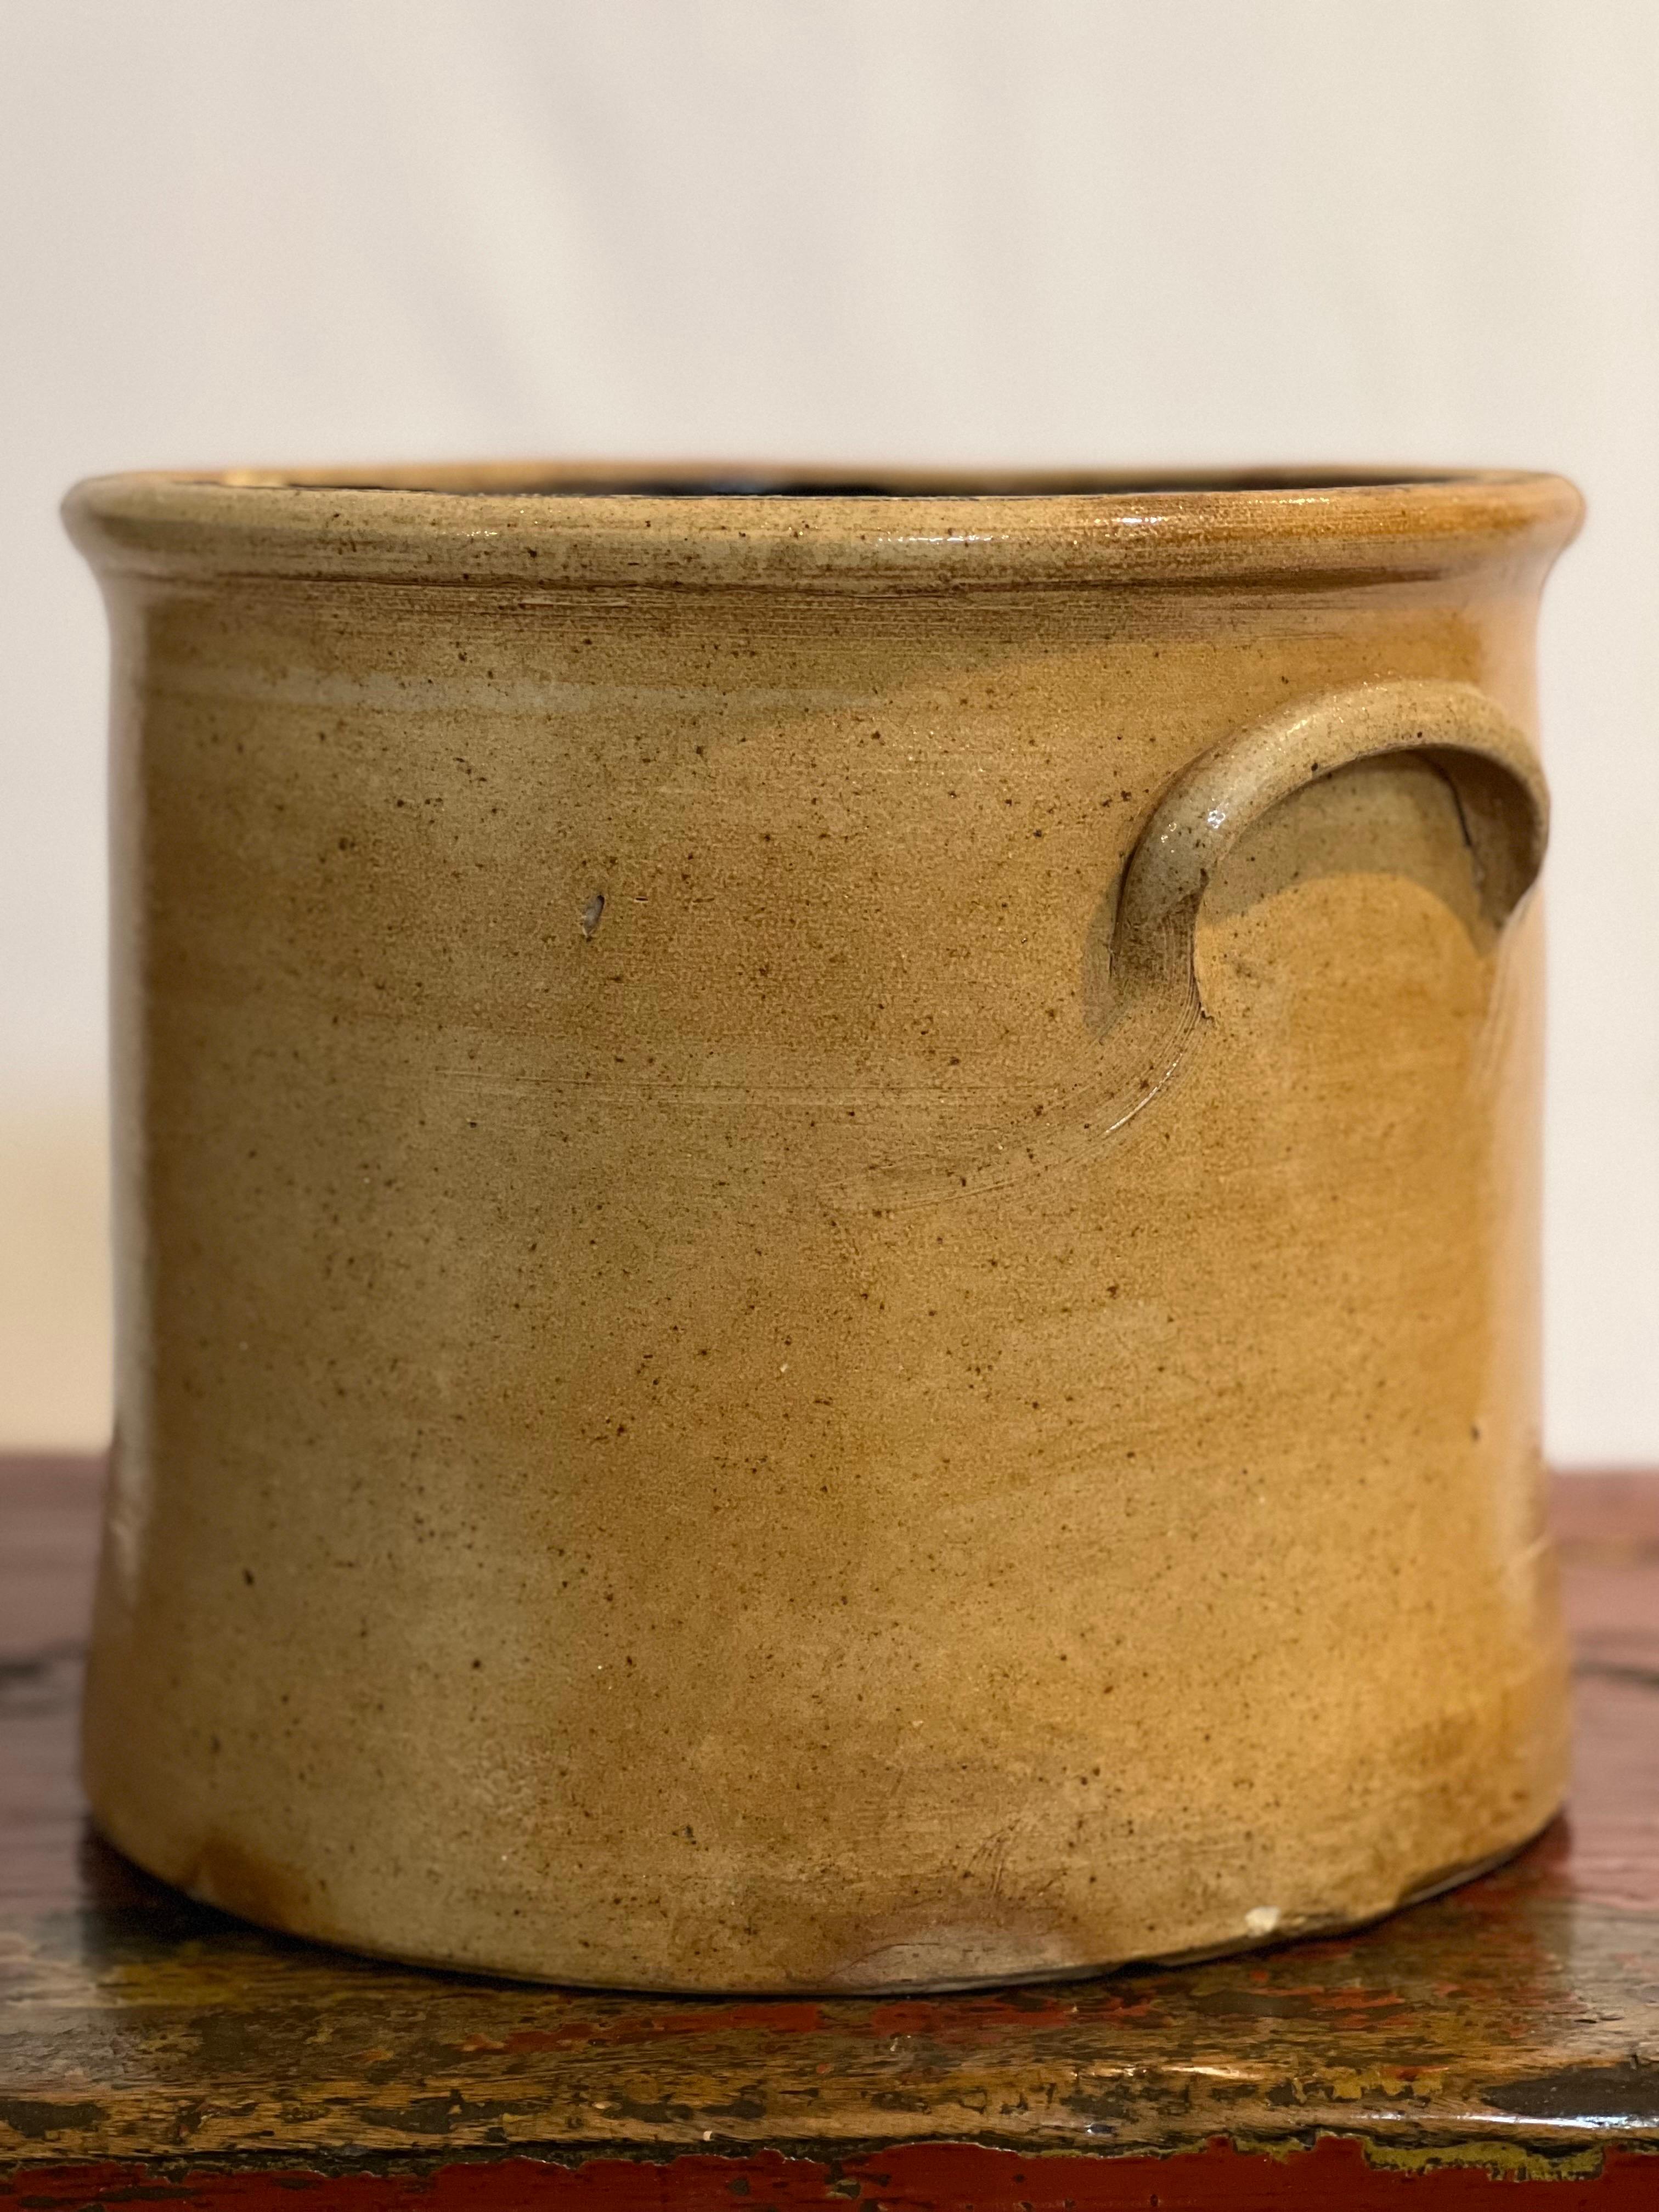 19th century two gallon salt glazed stoneware crock, circa 1860s.

In the style of H. Weston, the crock features a rounded rim, applied lug handles and cobalt blue floral/bee sting motif. A great size perfect for many uses and will add a touch of